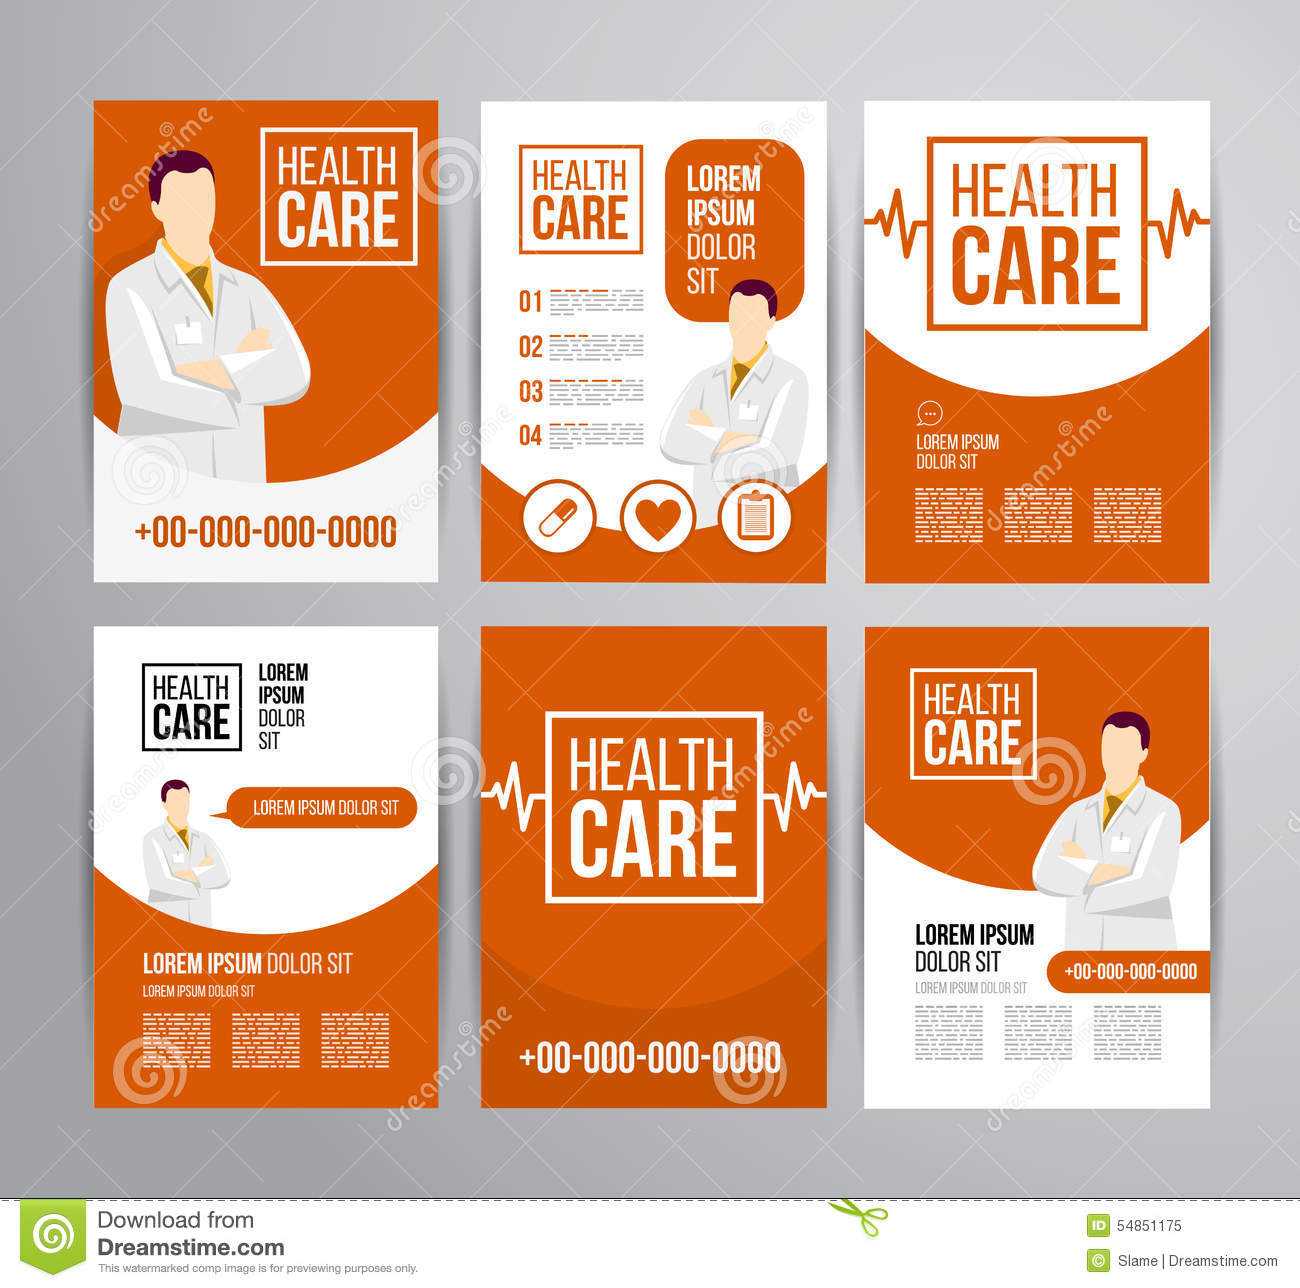 Healthcare Brochure Stock Vector. Illustration Of Business With Healthcare Brochure Templates Free Download